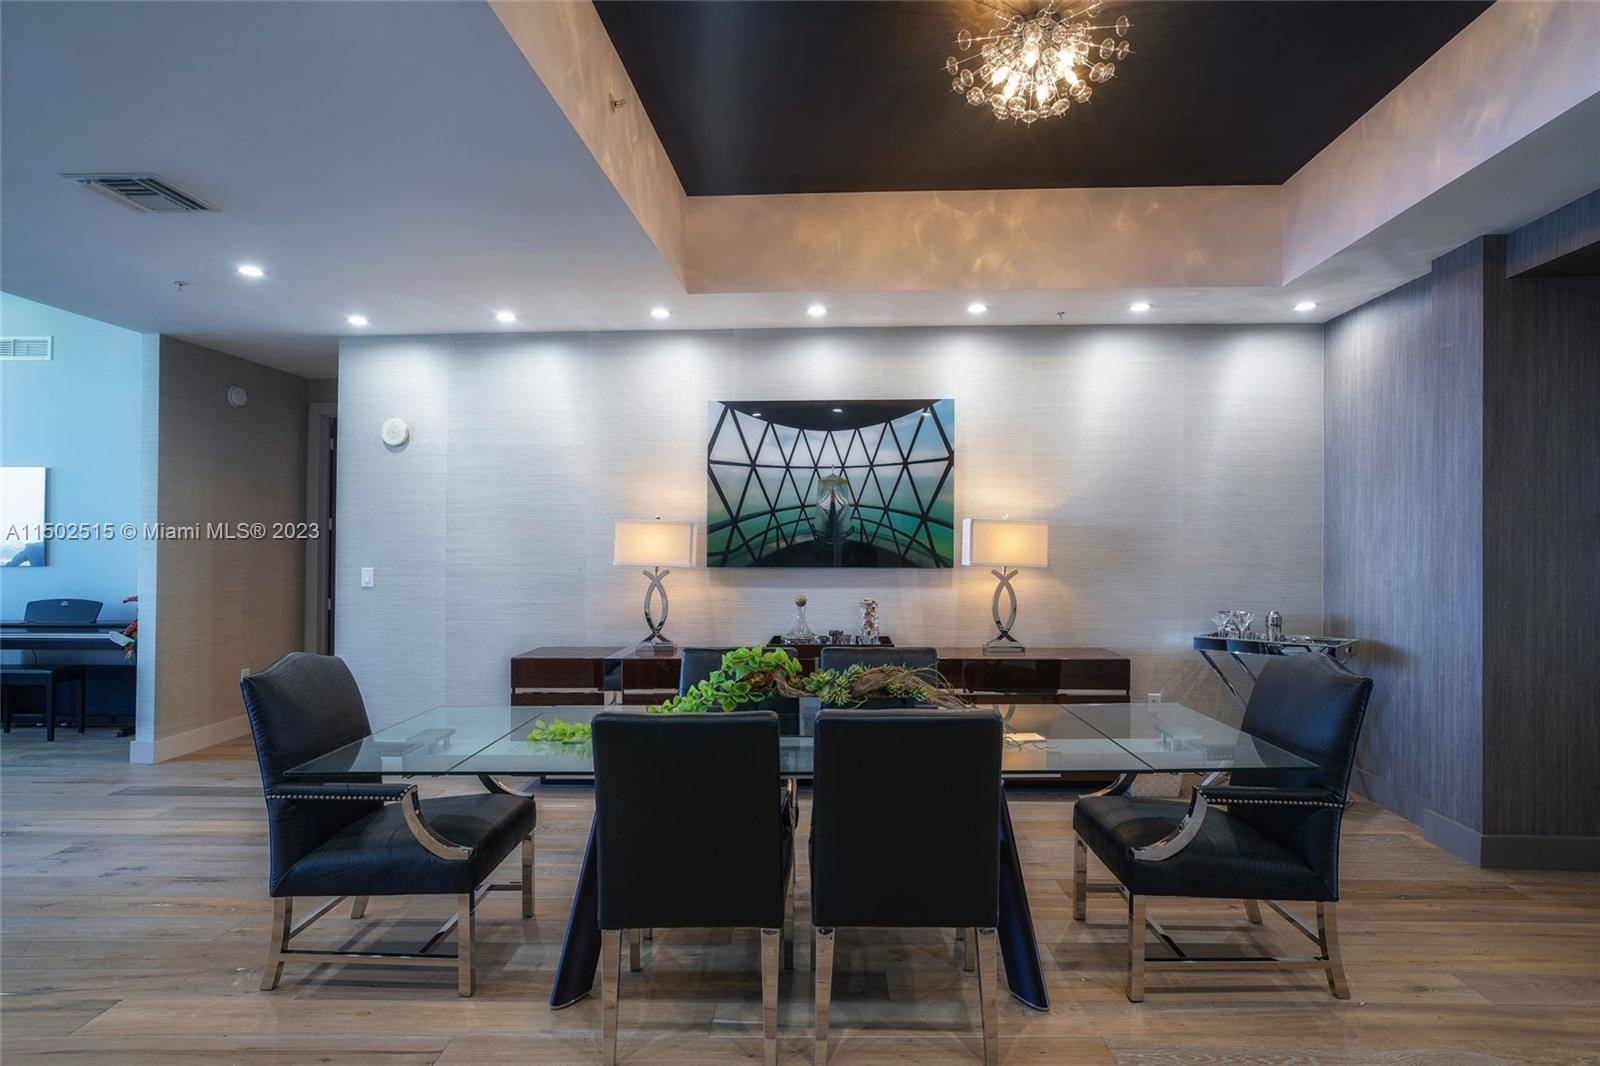 Penthouse 6 unveils an impressive 2 story layout adorned with 11' vaulted ceilings and hardwood floors, enhancing the turn key interior with expansive space.